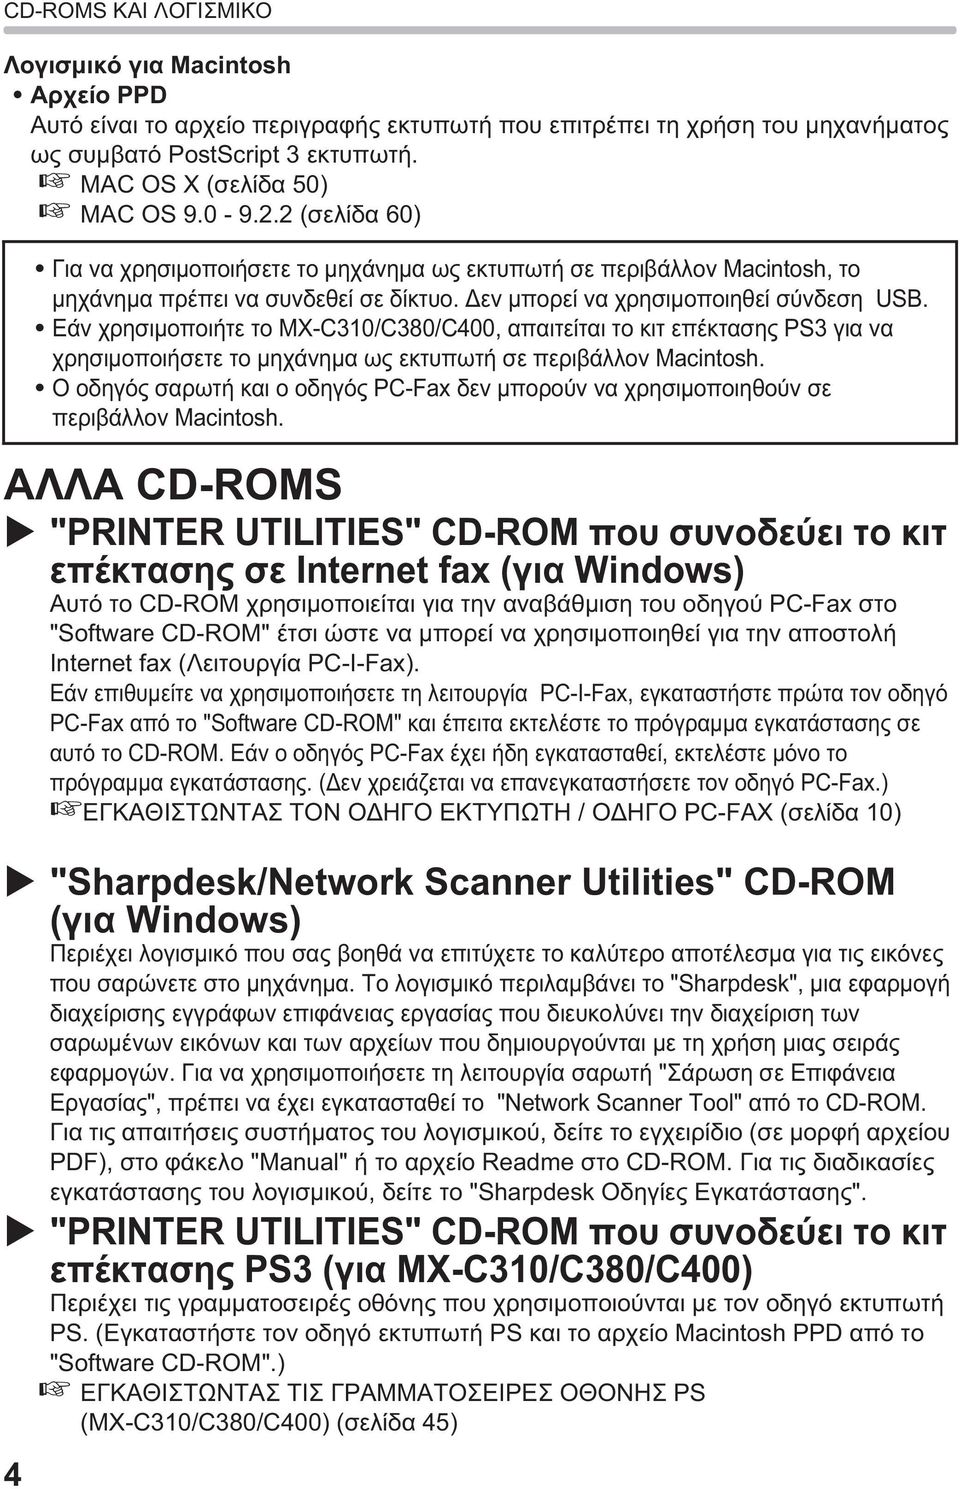 PC-I-Fax, PC-Fax "Software CD-ROM" CD-ROM. PC-Fax,. ( PC-Fax.) / PC-FAX ( 10) "Sharpdesk/Network Scanner Utilities" CD-ROM ( Windows). "Sharpdesk",.